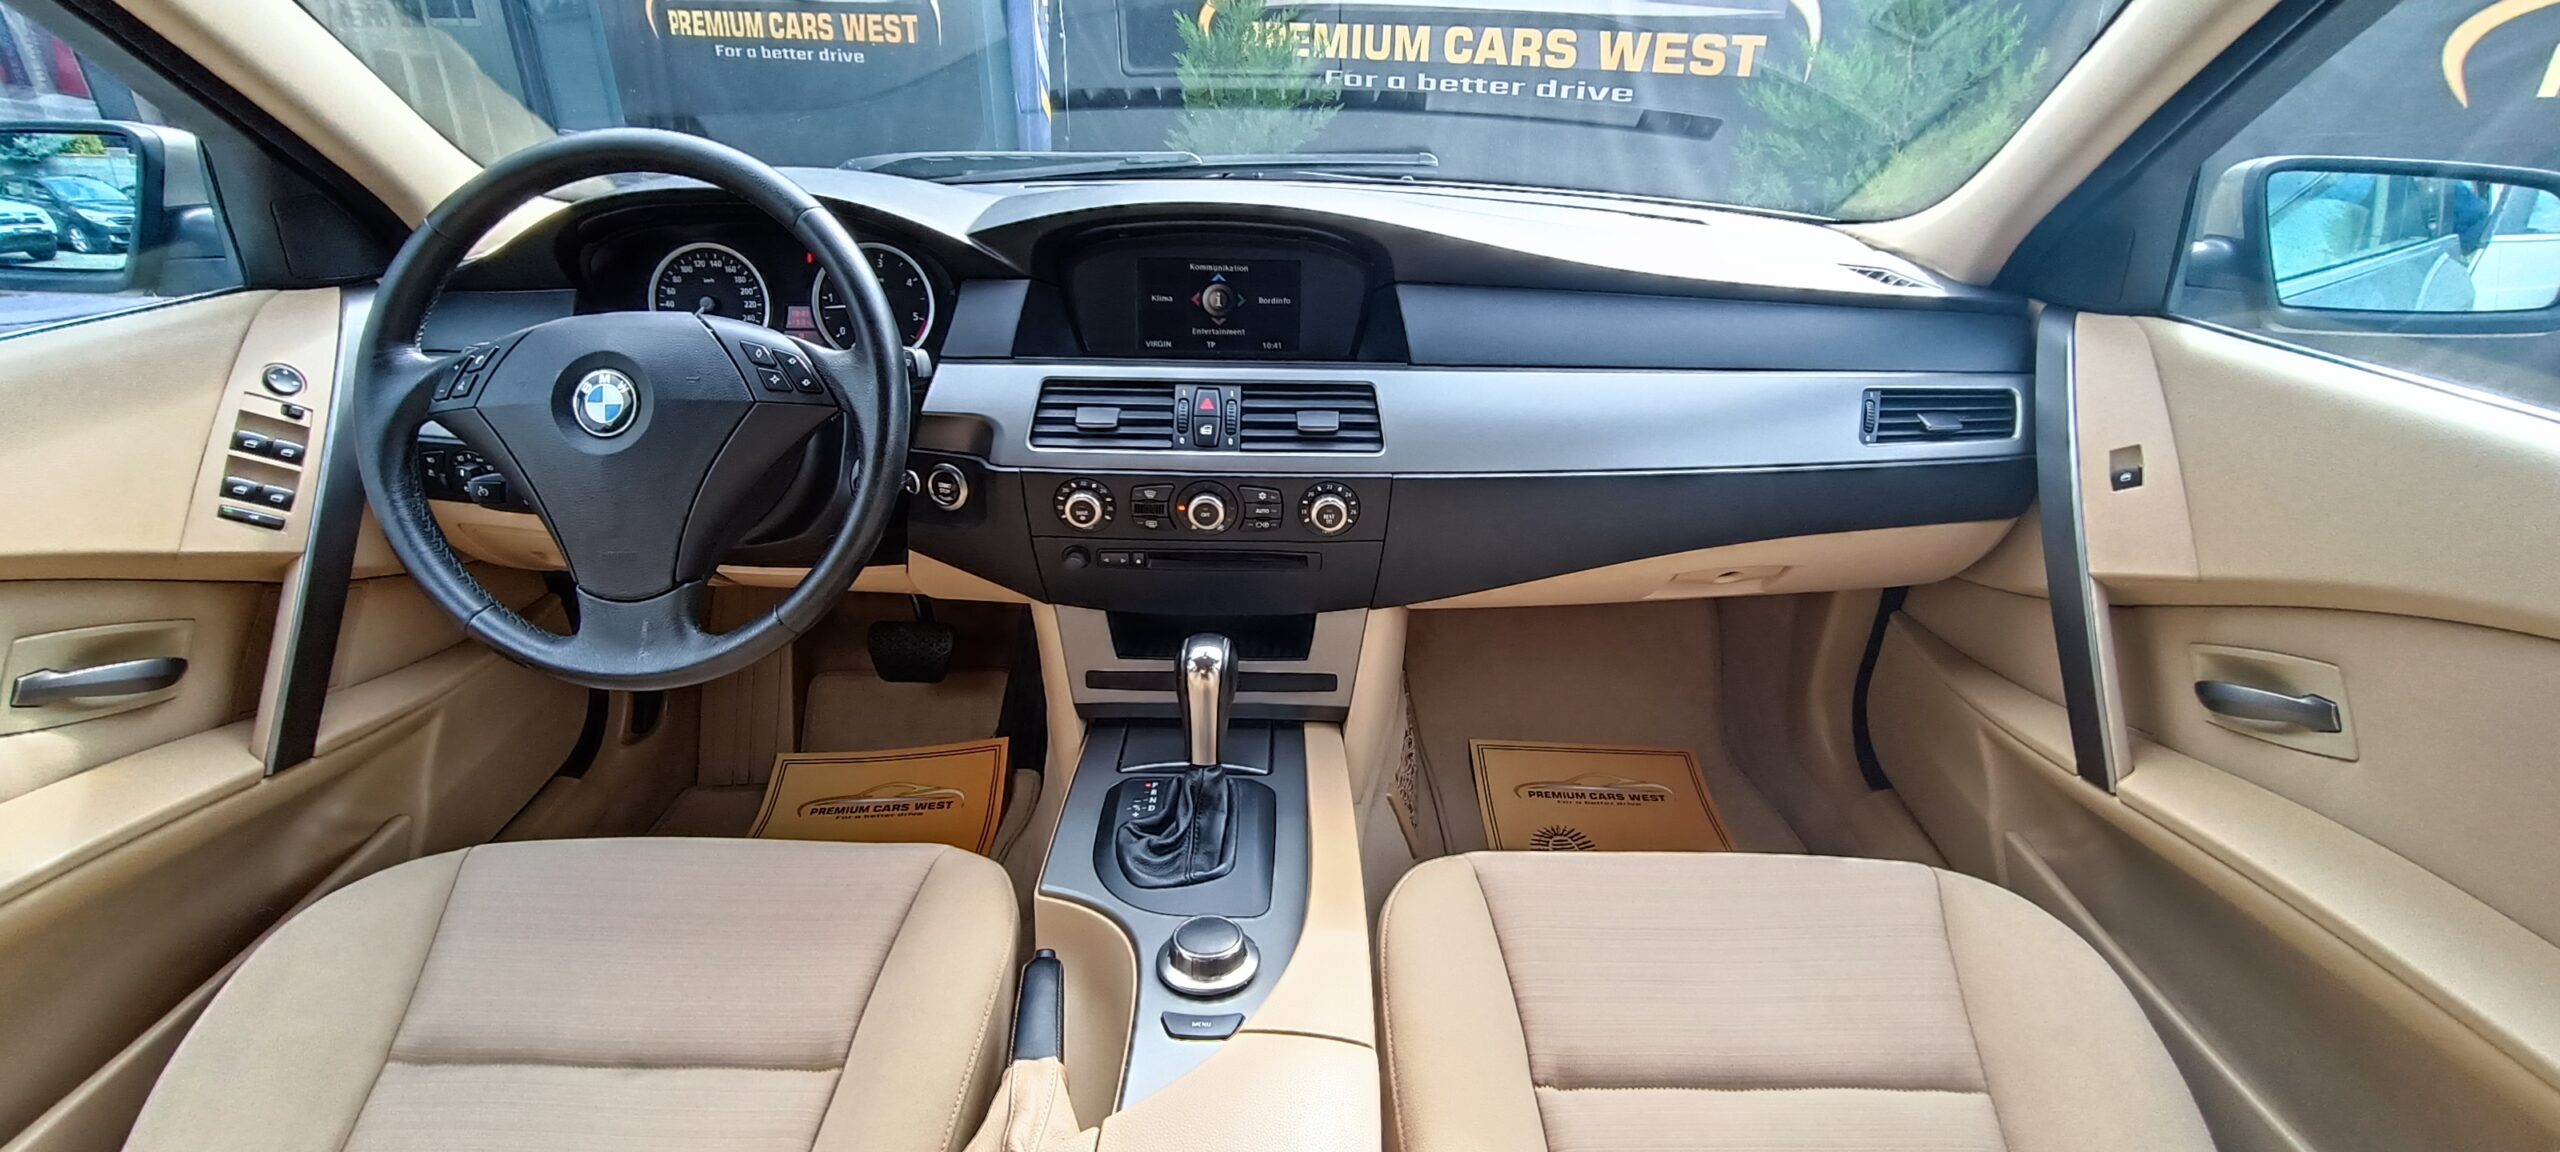 BMW 520 D, AUTOMATIC 163 CP, 2007